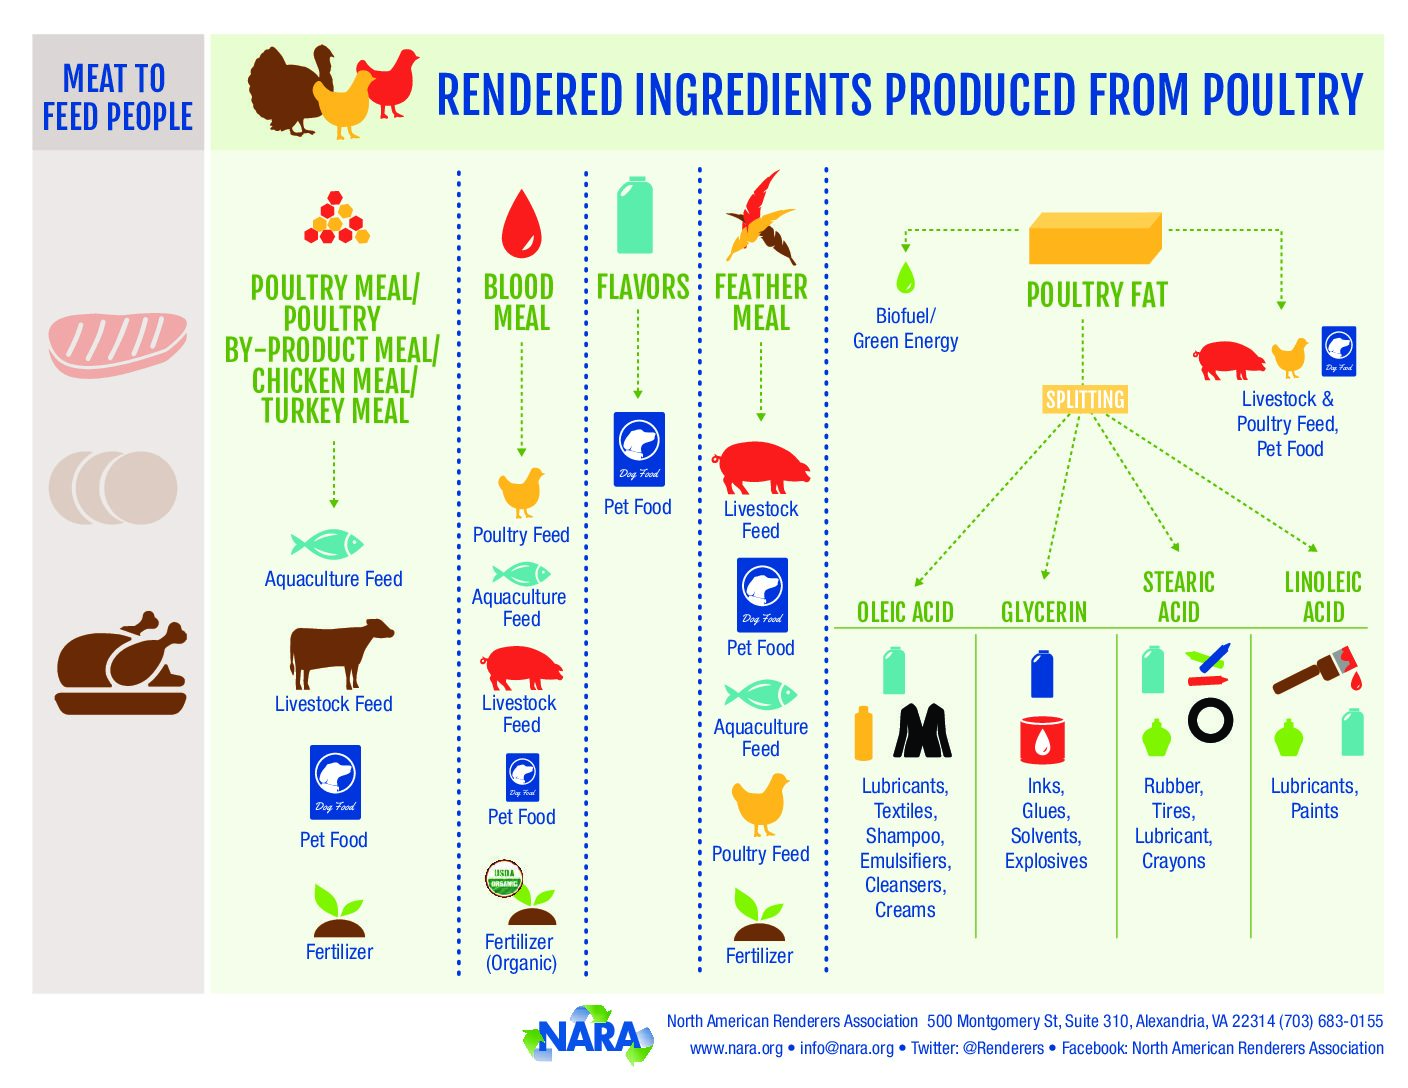 Rendering Ingredients: Produced from Poultry